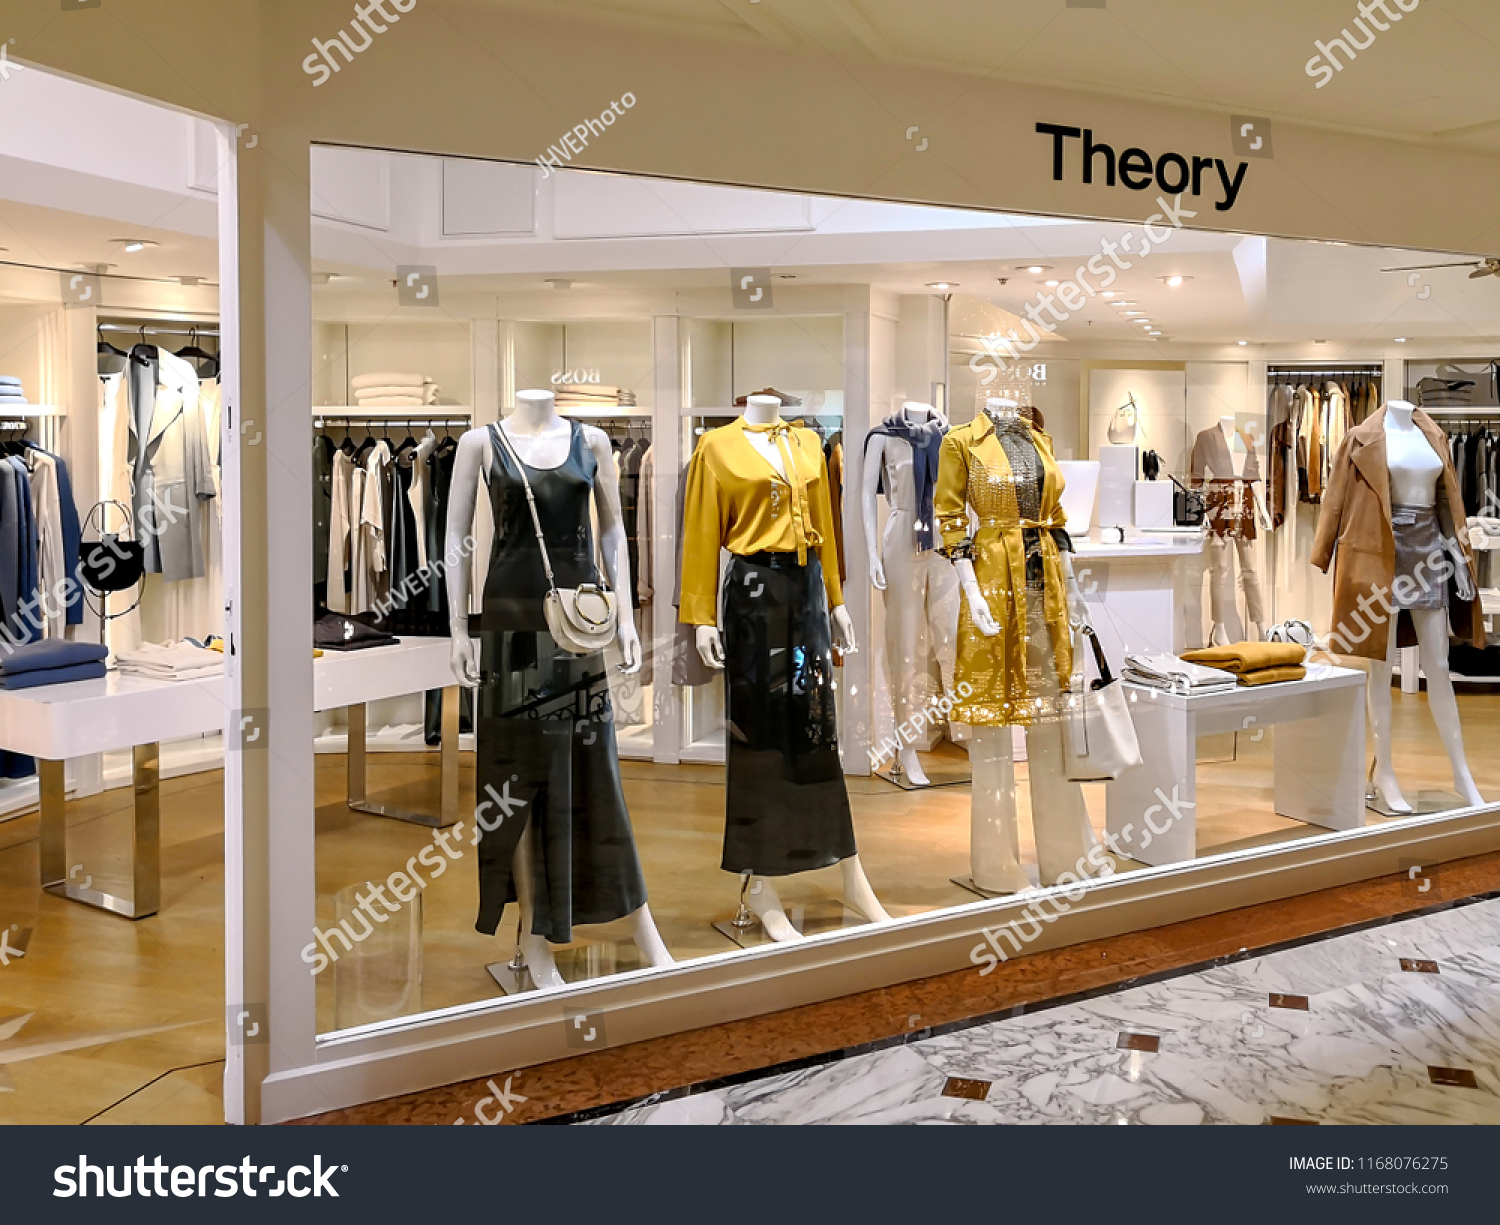 666 Theory store Images, Stock Photos & Vectors | Shutterstock